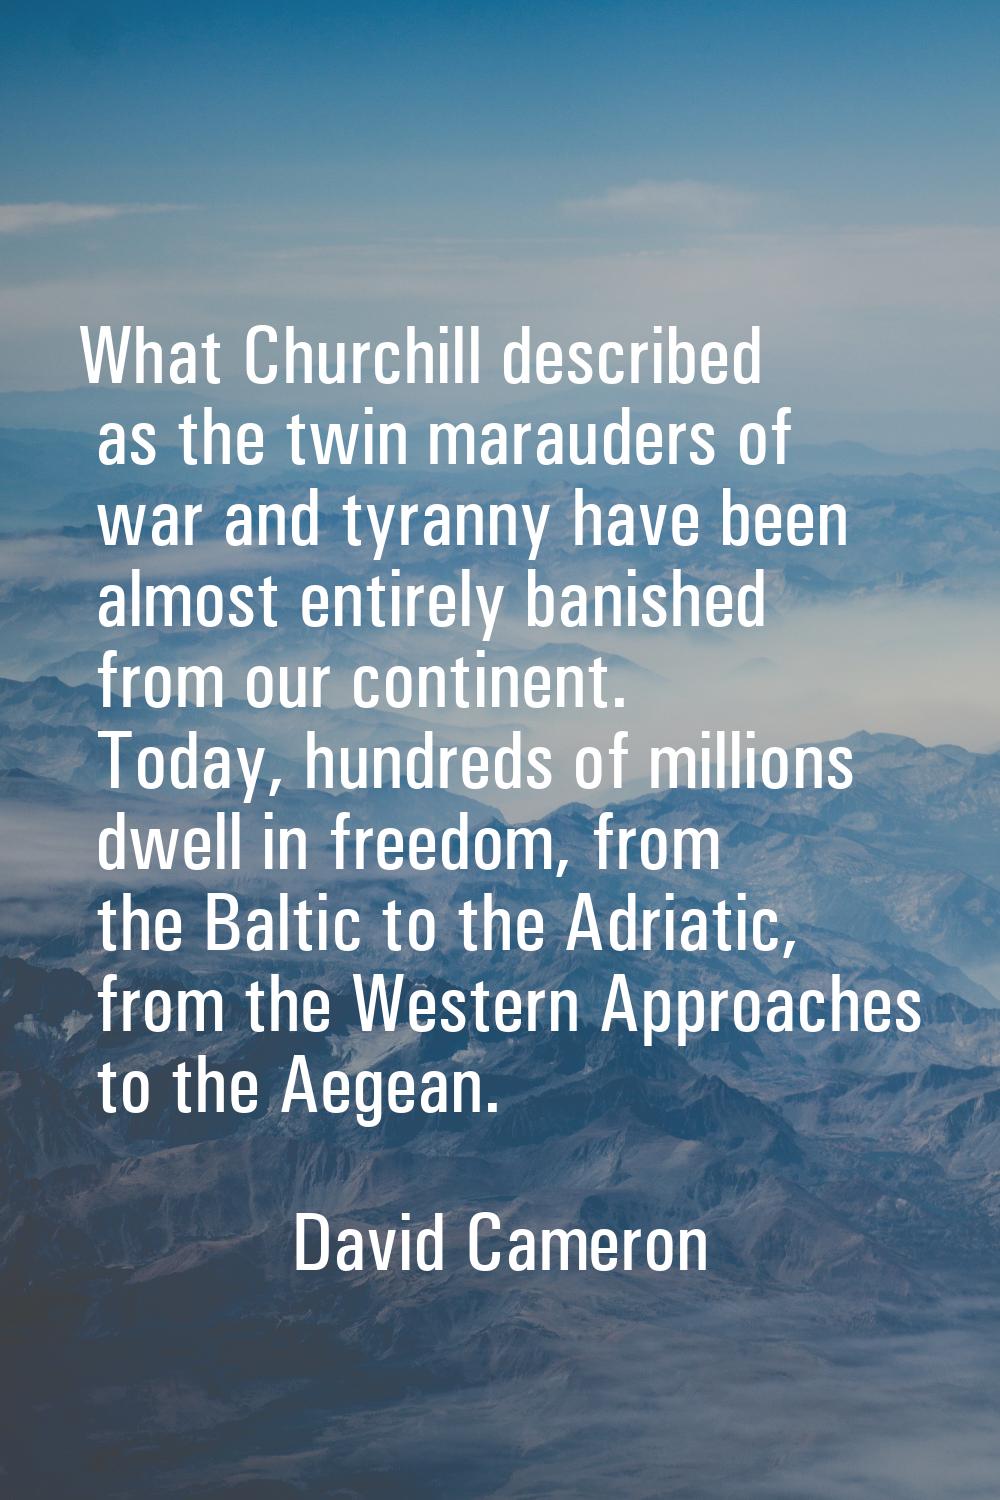 What Churchill described as the twin marauders of war and tyranny have been almost entirely banishe